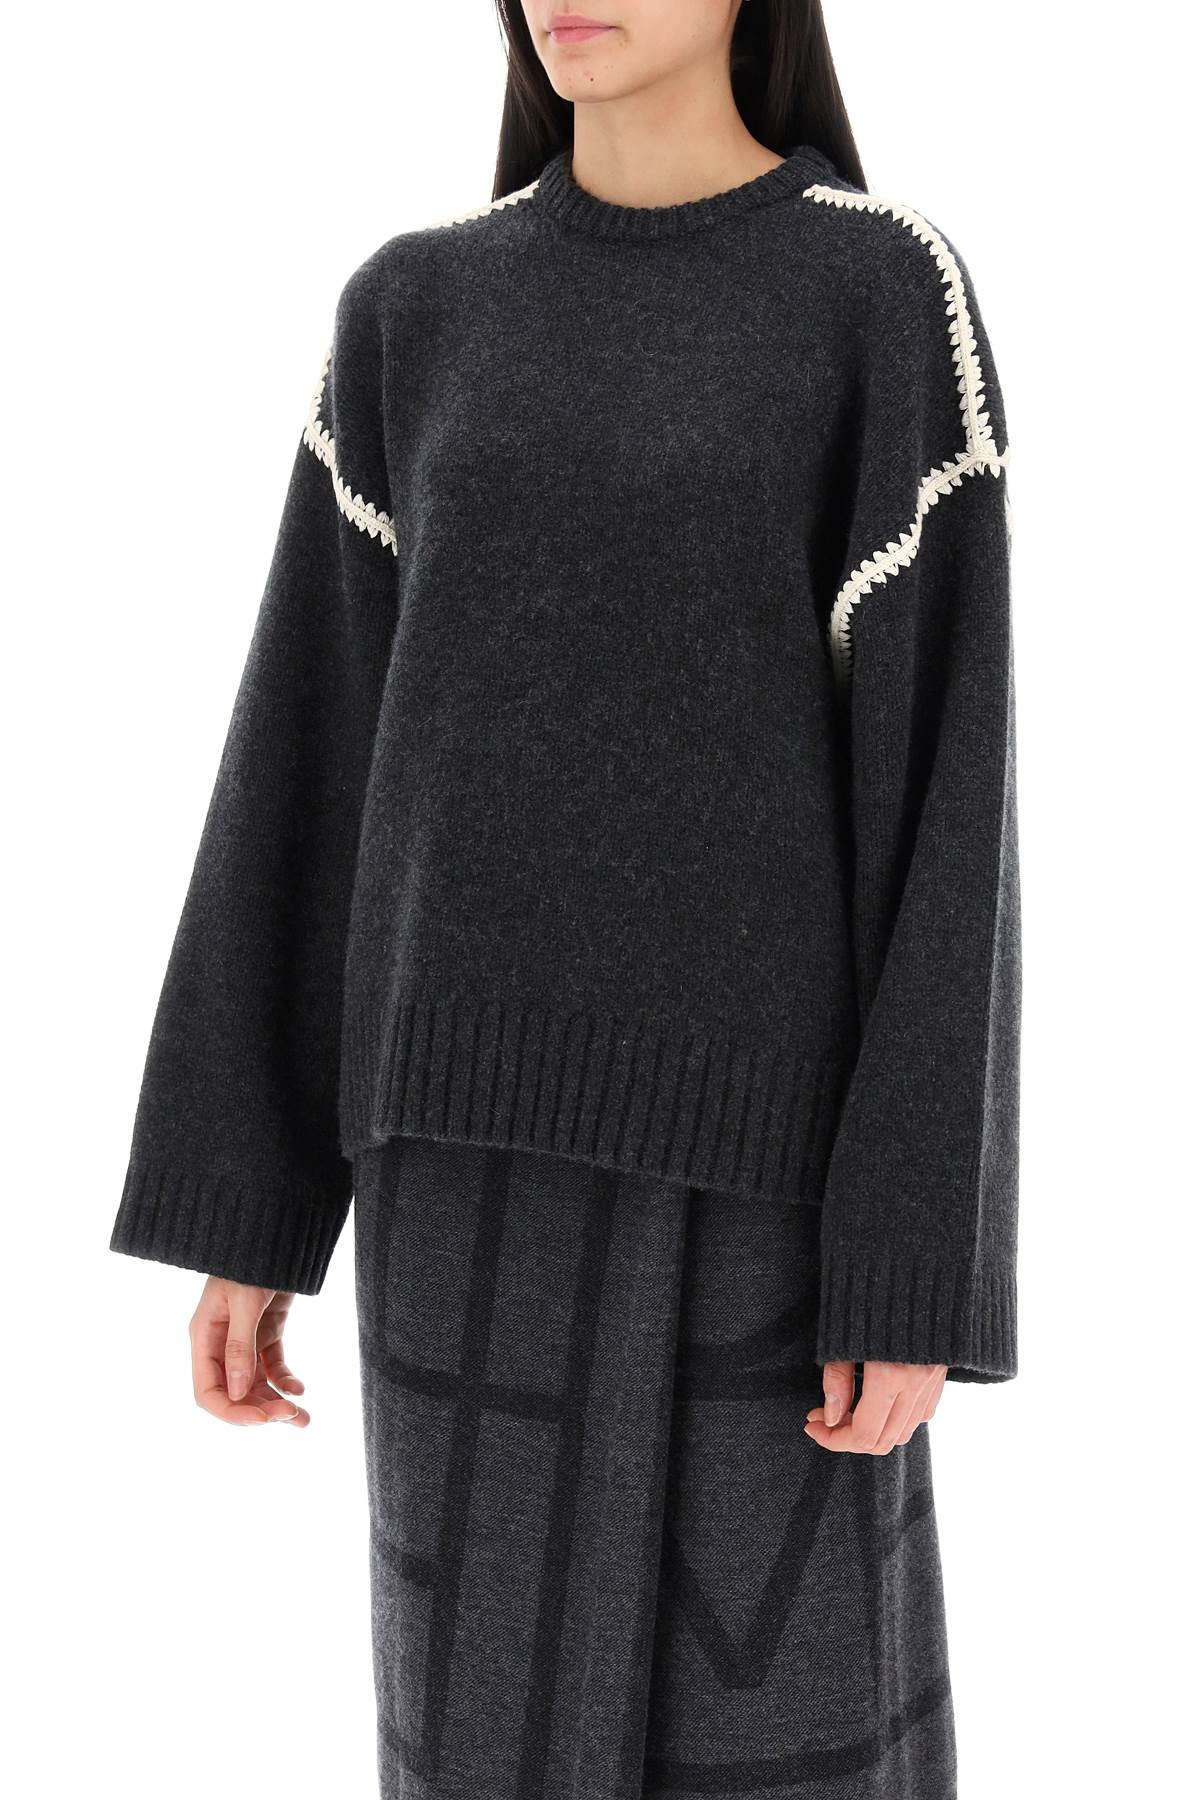 Toteme Sweater With Contrast Embroideries Women - 4